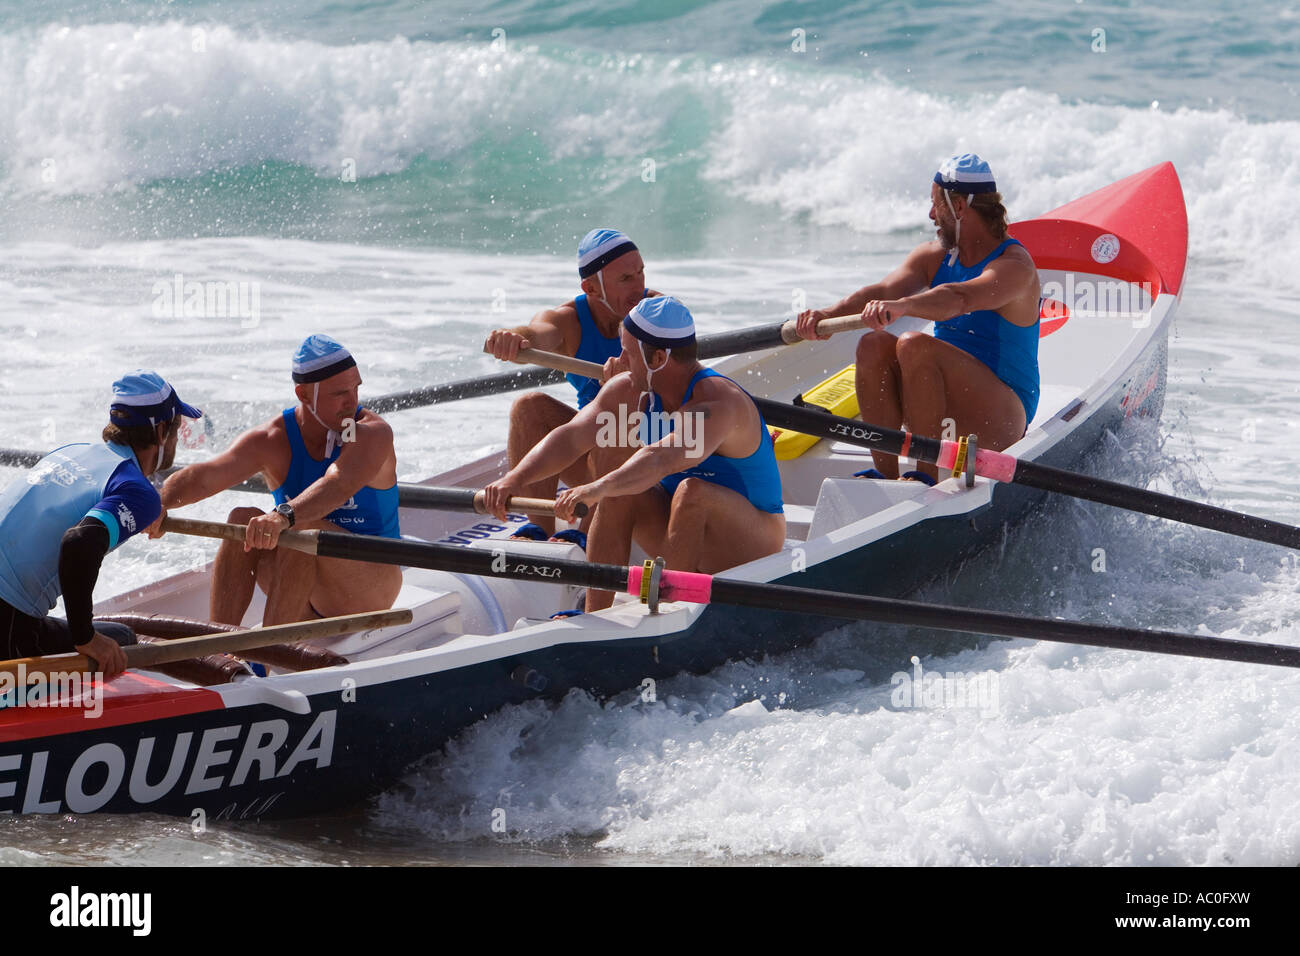 A surfboat crew battles to row out through the waves during a race at Cronulla Beach Stock Photo